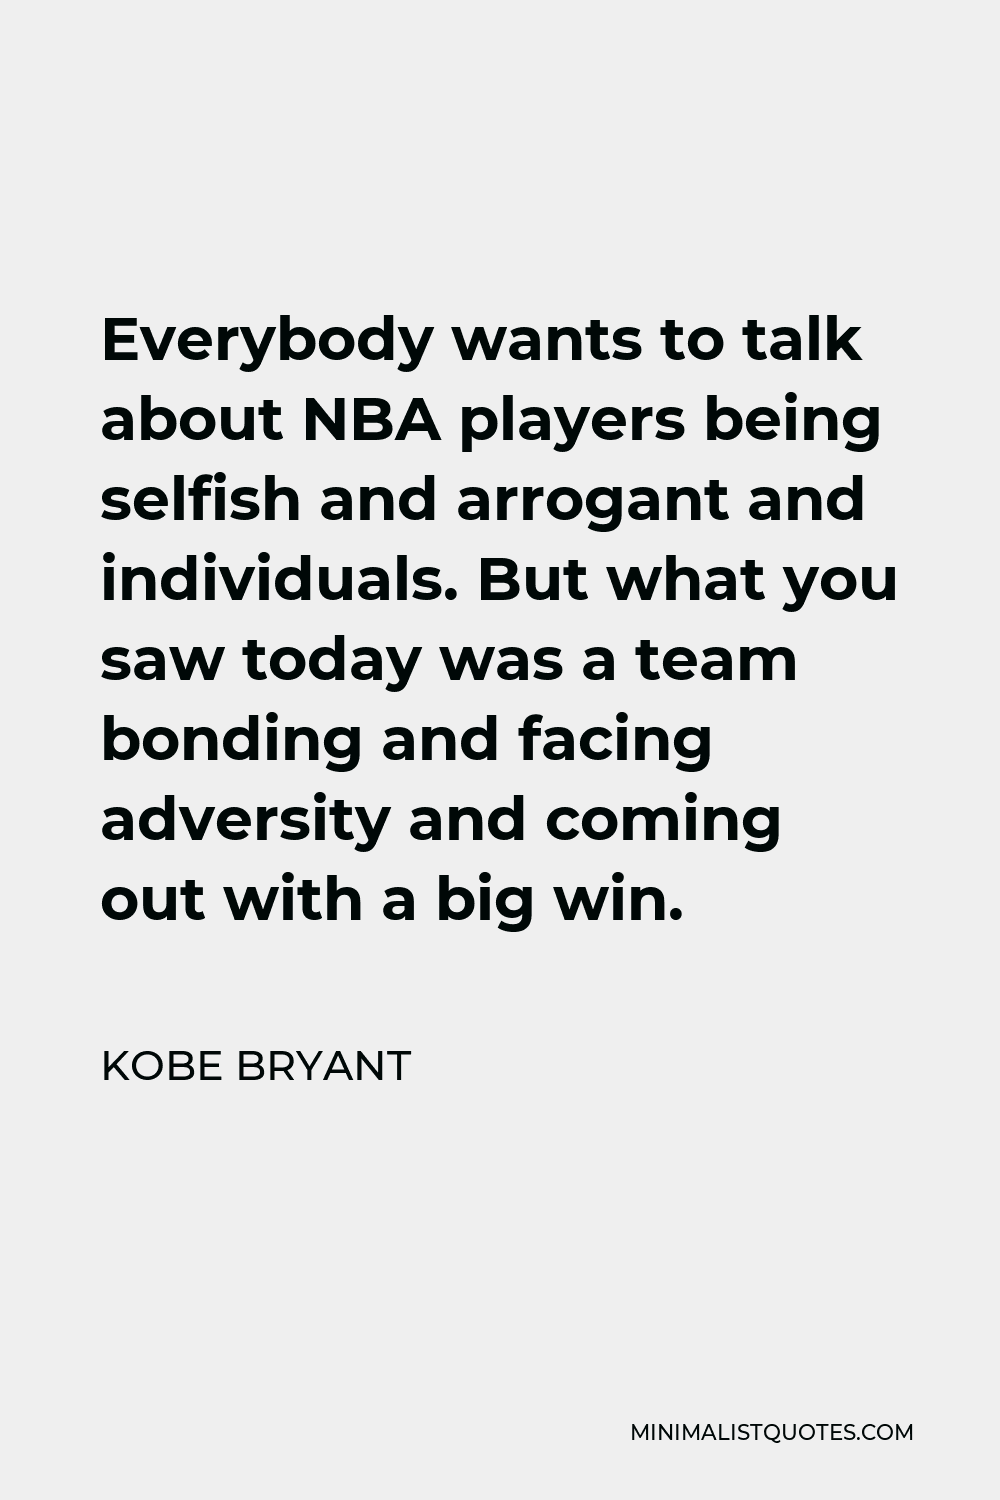 Kobe Bryant Quote - Everybody wants to talk about NBA players being selfish and arrogant and individuals. But what you saw today was a team bonding and facing adversity and coming out with a big win.